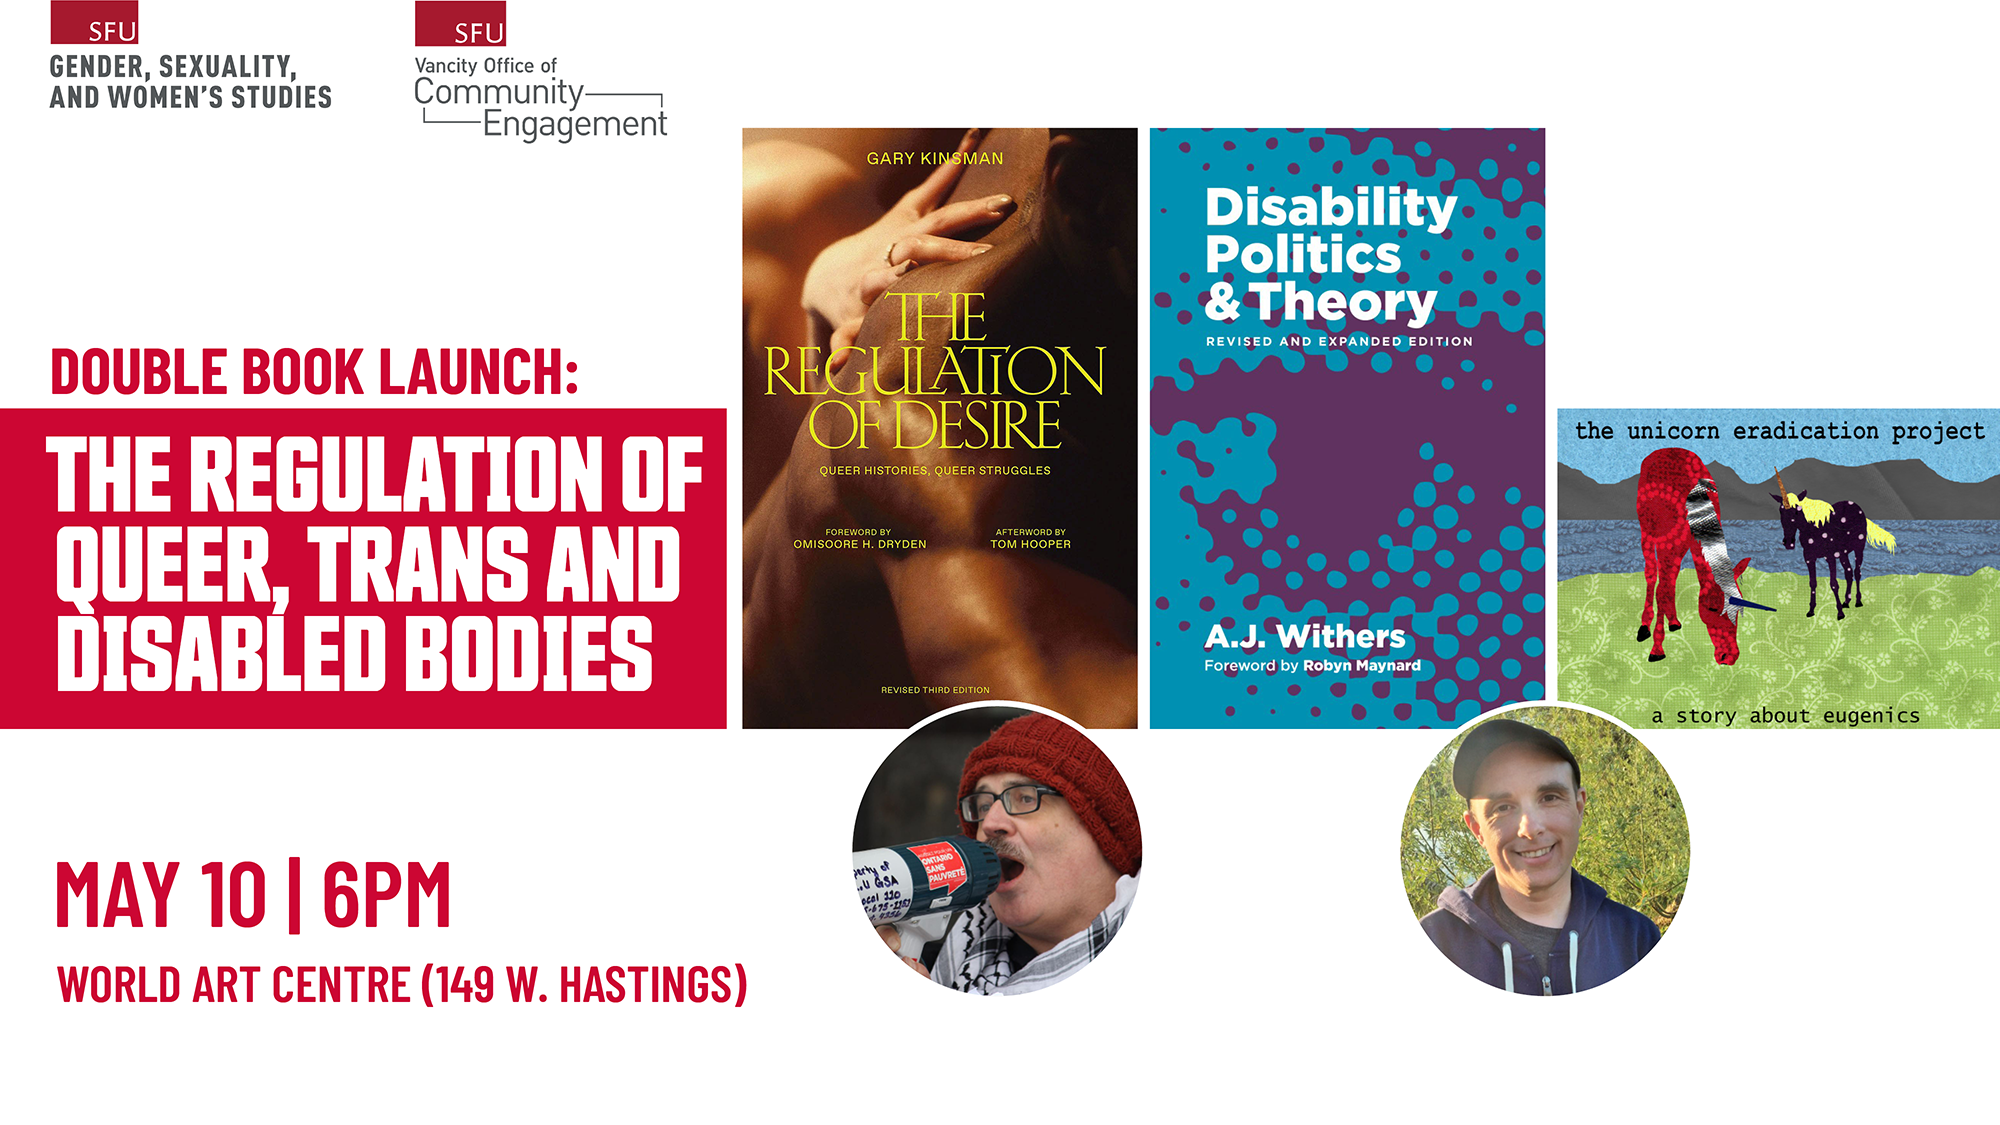 Double Book Launch: The Regulation of Queer, Trans and Disabled Bodies